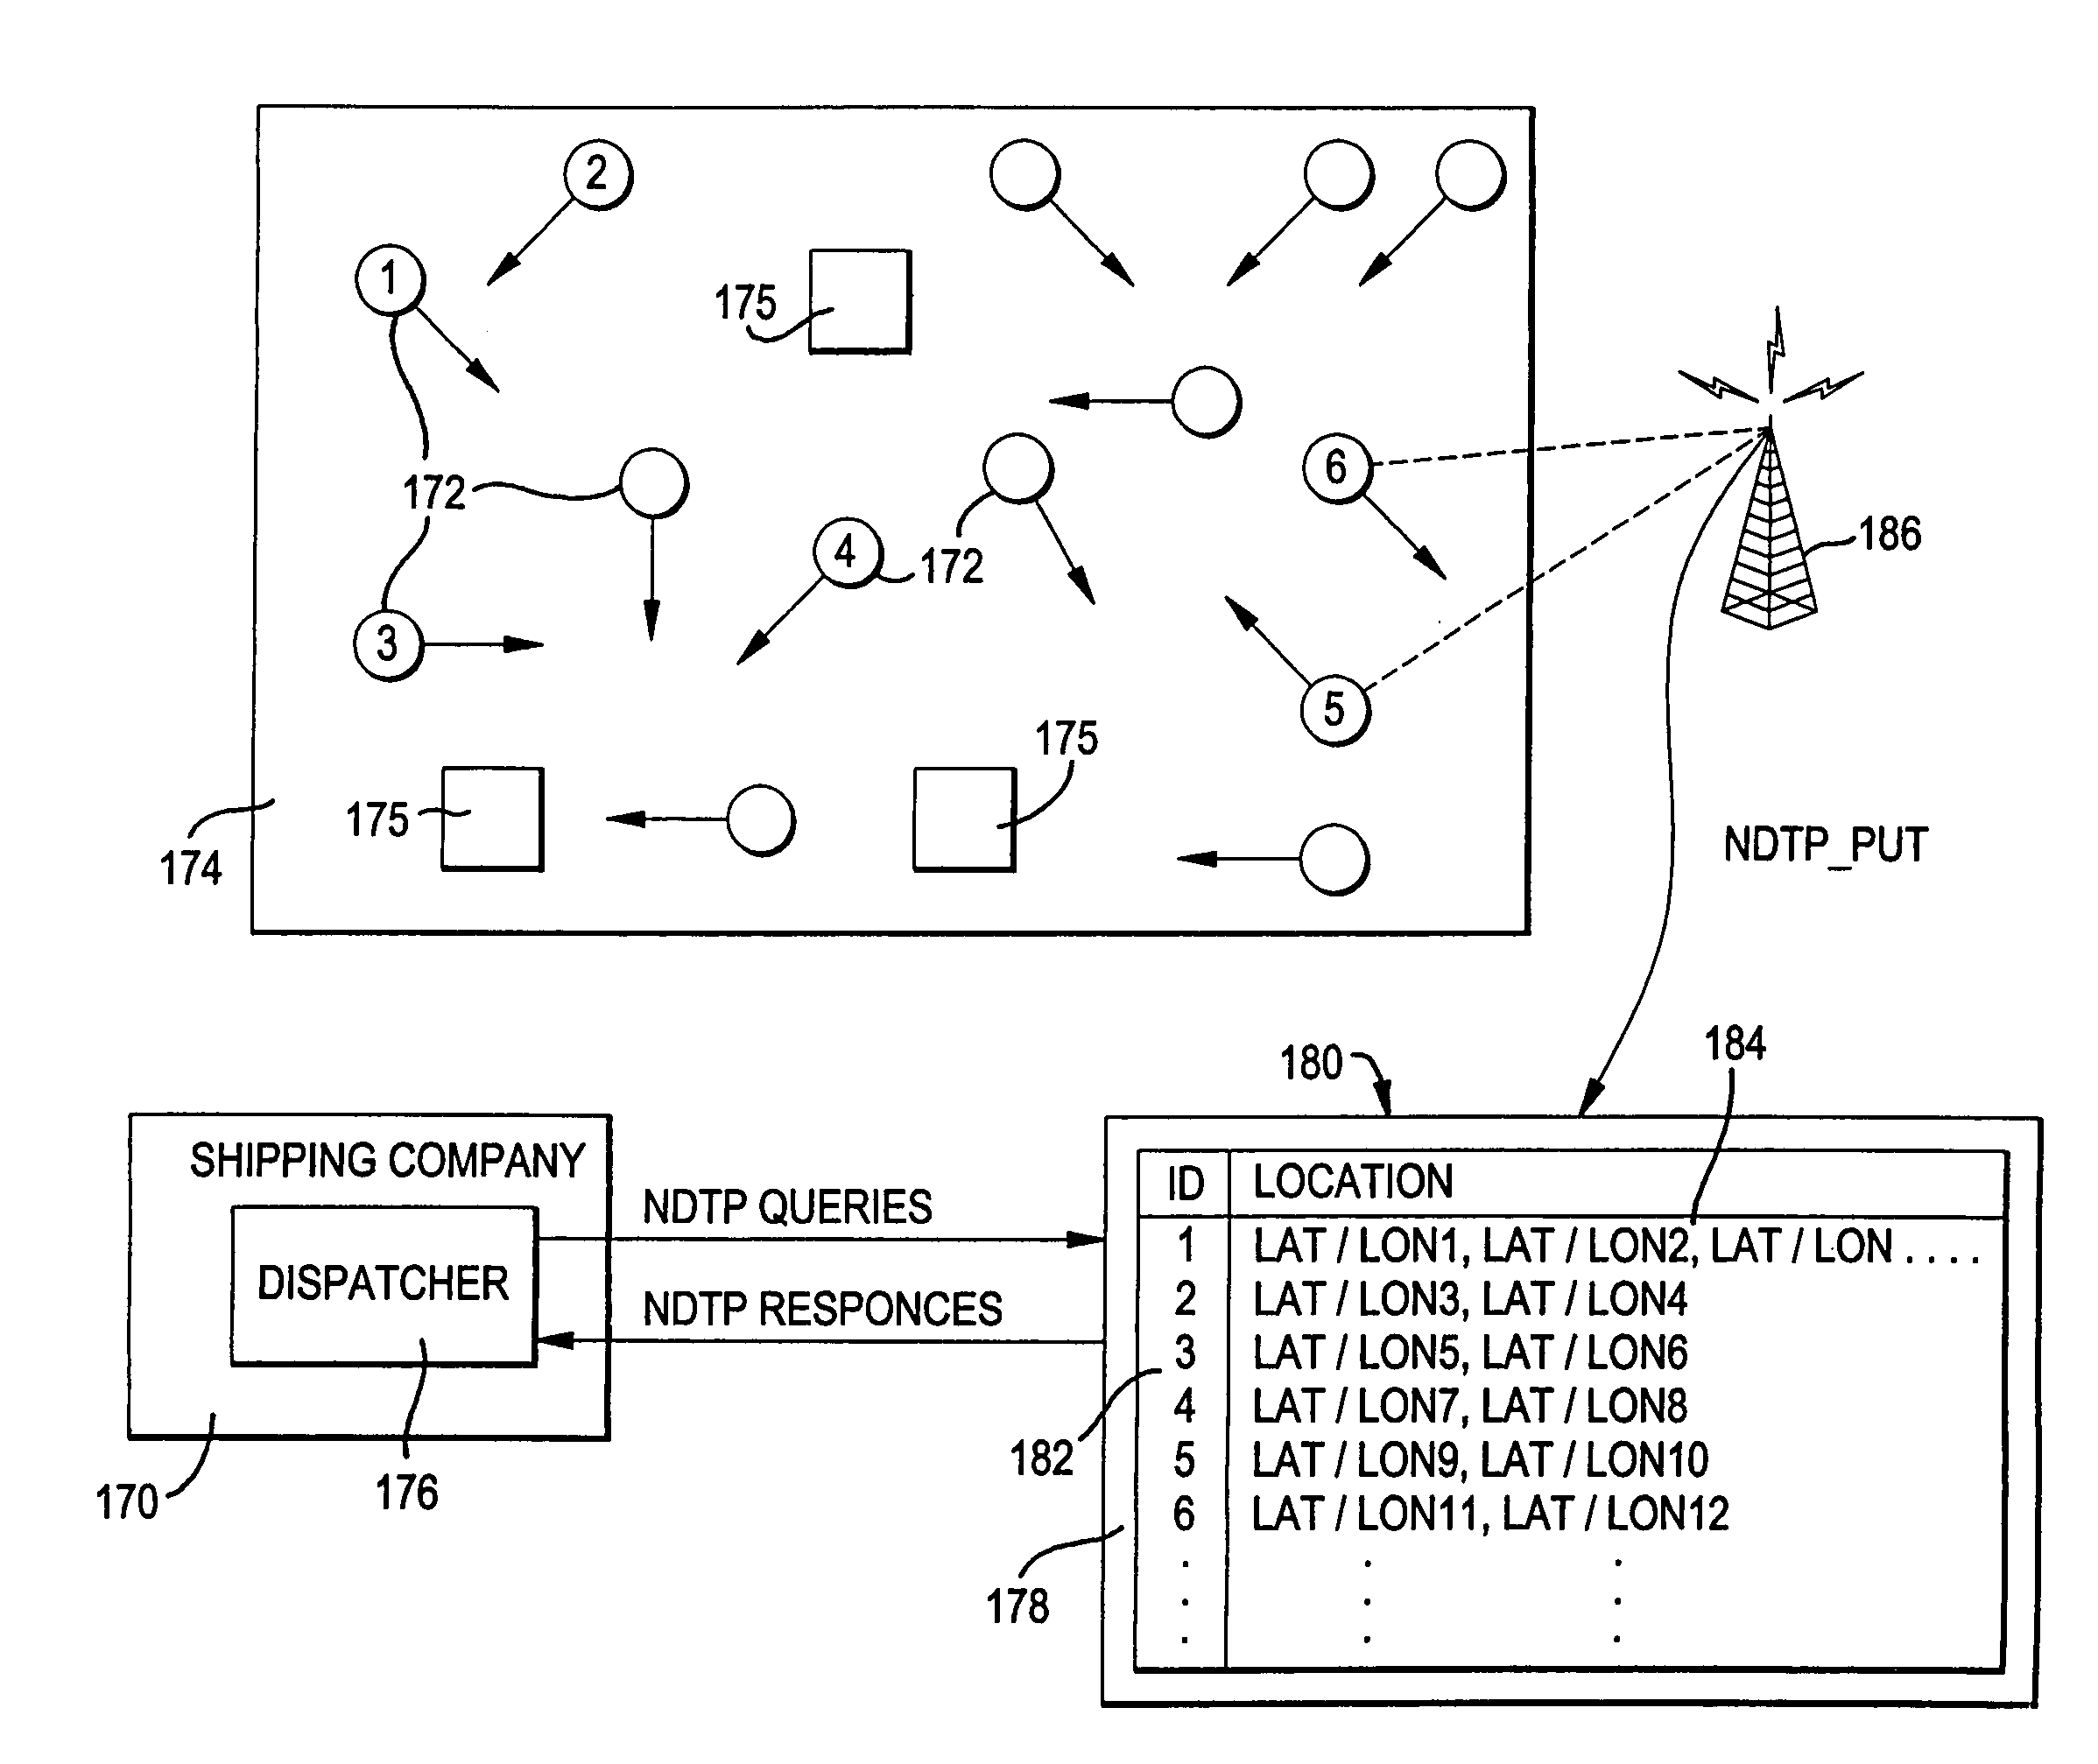 Method and apparatus for managing location information in a network separate from the data to which the location information pertains